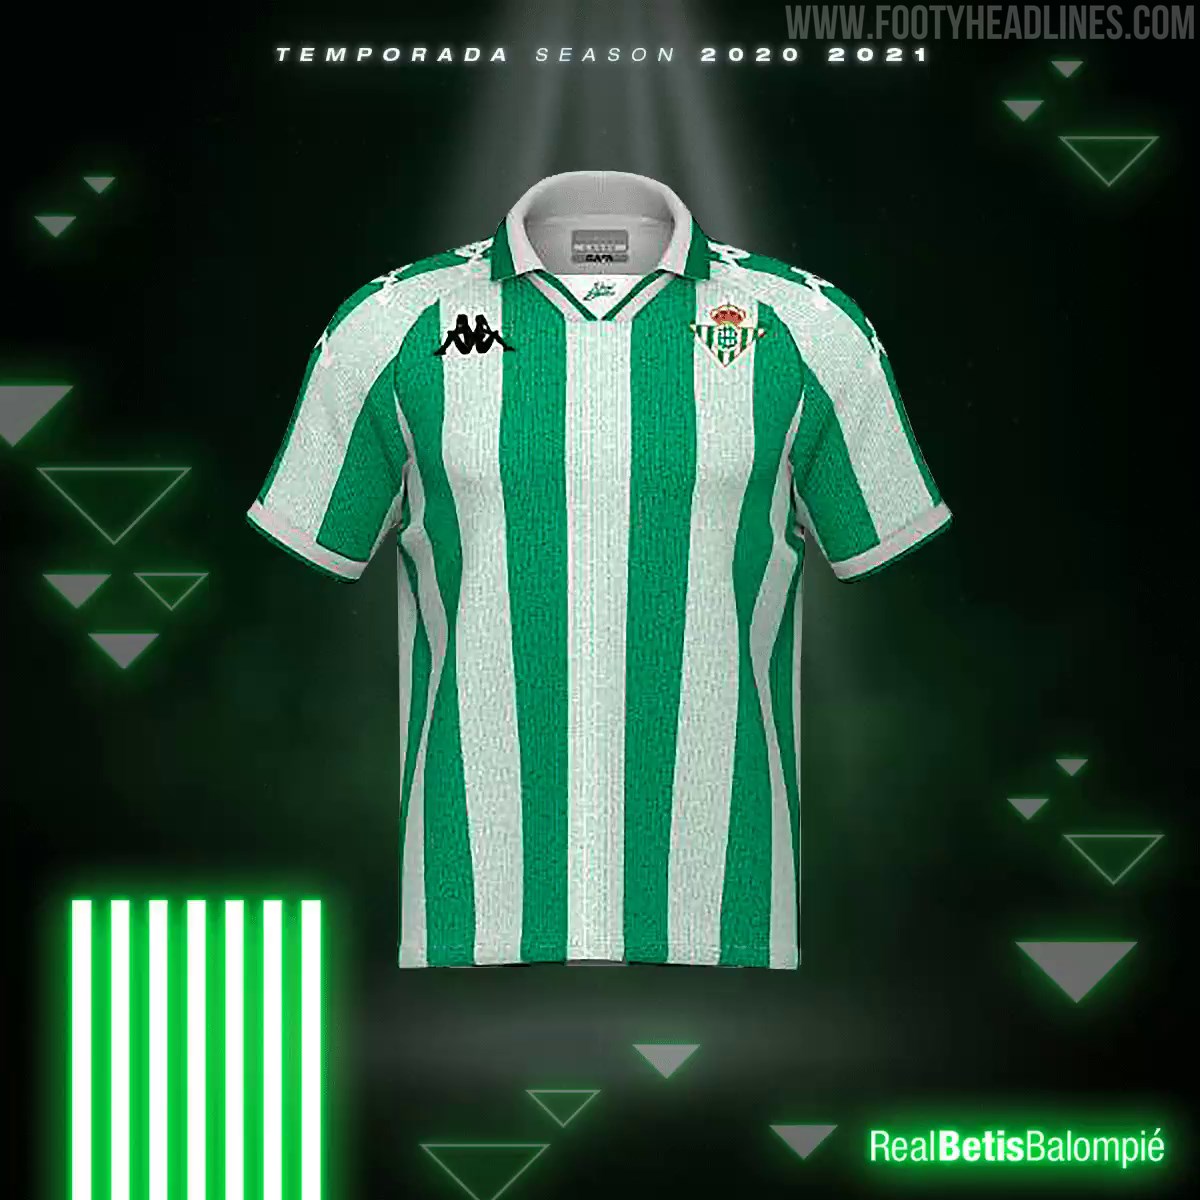 Racing Club 2021 Special-Edition Kit Released - Footy Headlines